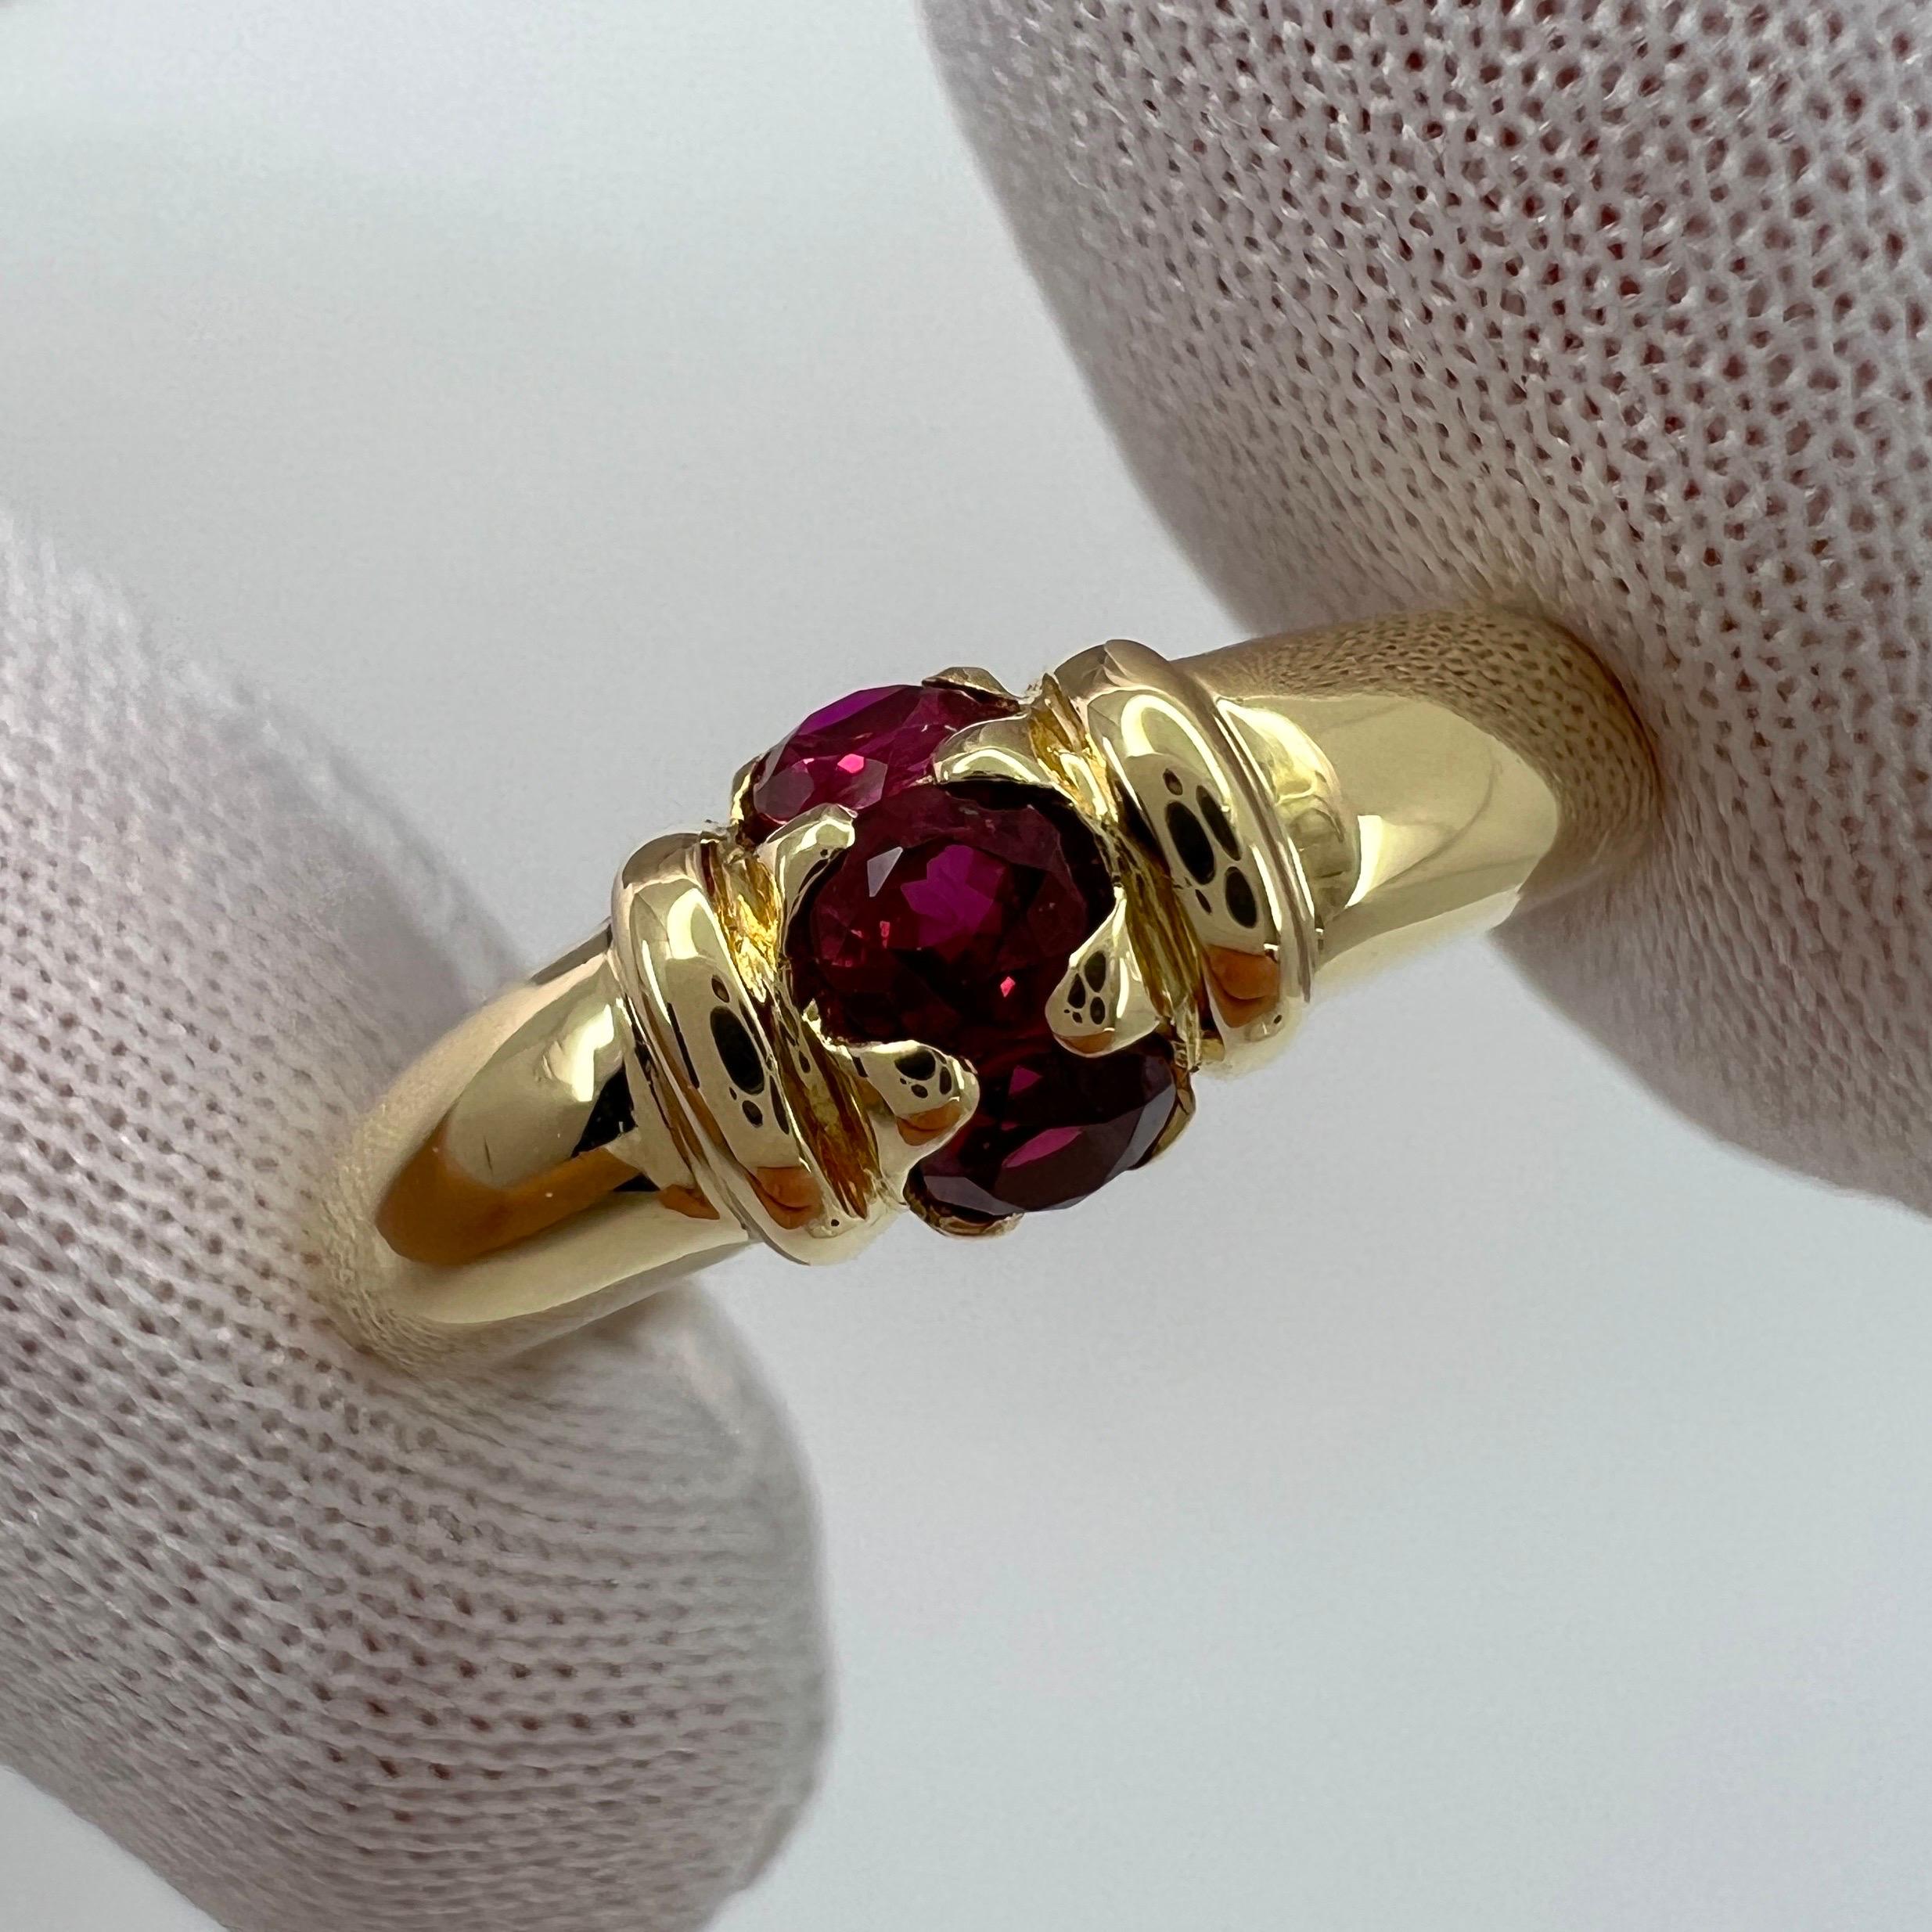 Vintage Van Cleef & Arpels Ruby Round Cut Three Stone 18k Yellow Gold Ring.

A stunning vintage ring with a classic three stone design. Set with three fine red rubies. All have a vivid red colour and an excellent round cut. Measuring just over 3mm